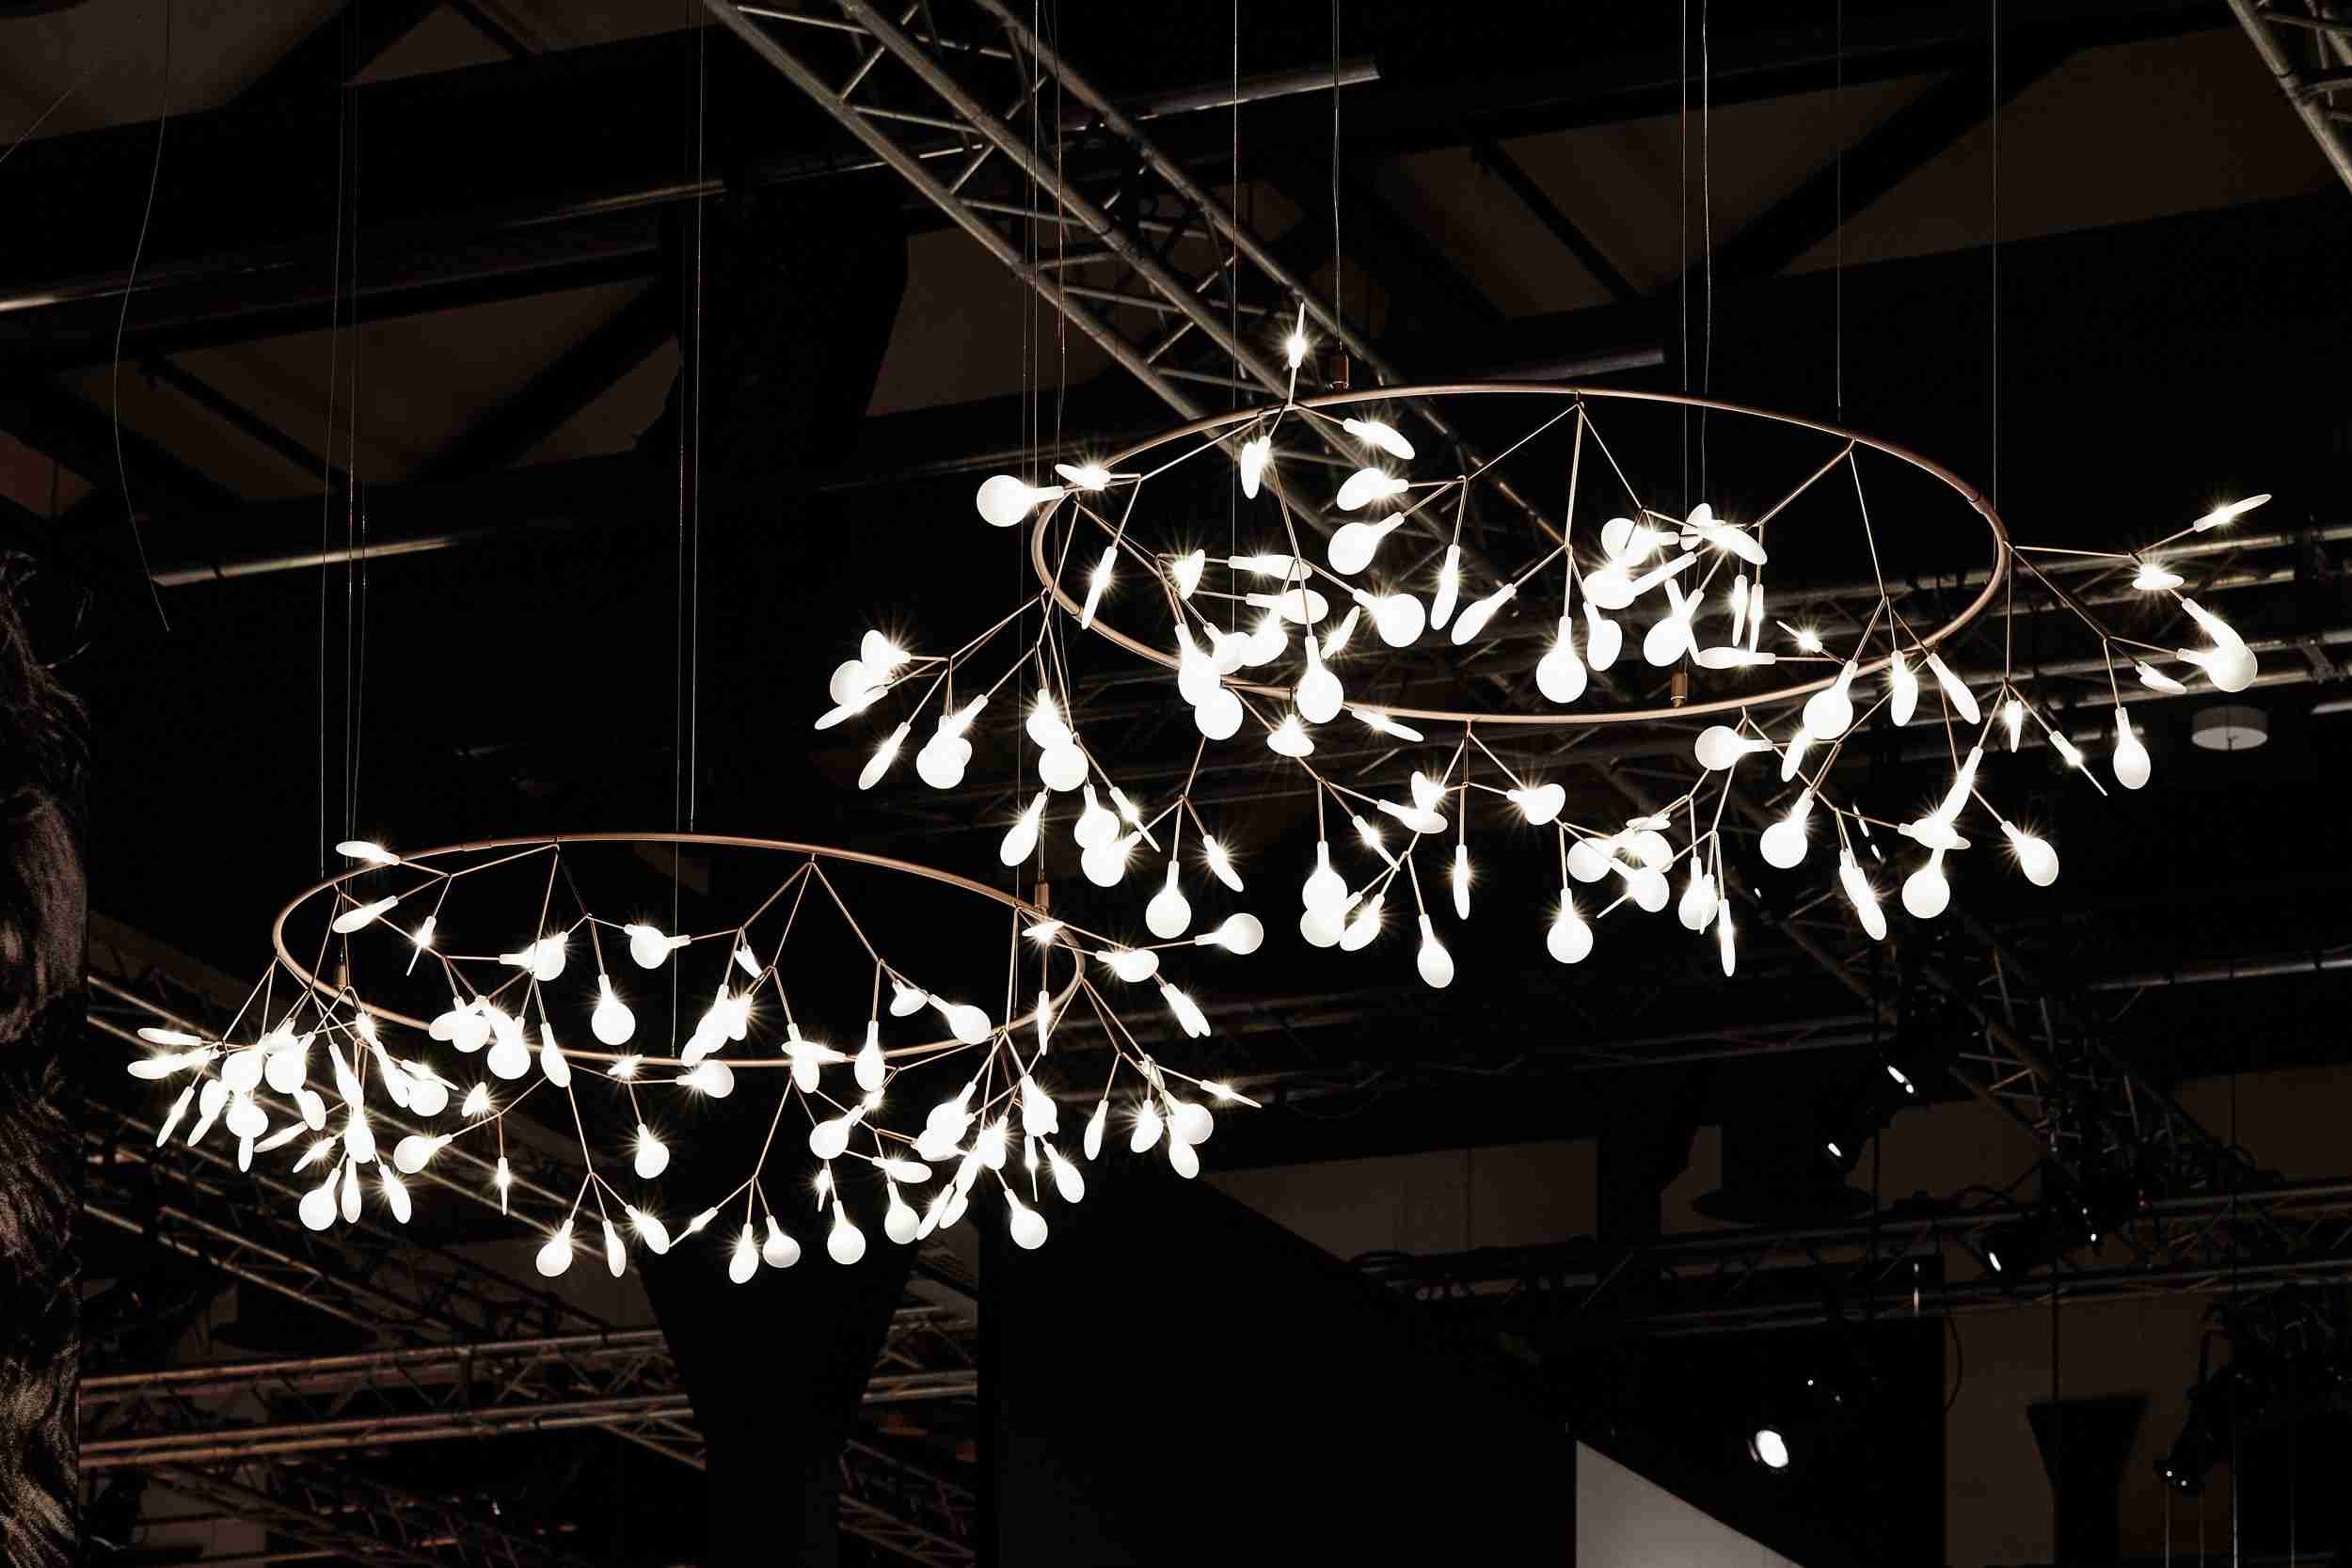 Chandelier Plant-Like Flowering LED Lights Create a Stunning Looking